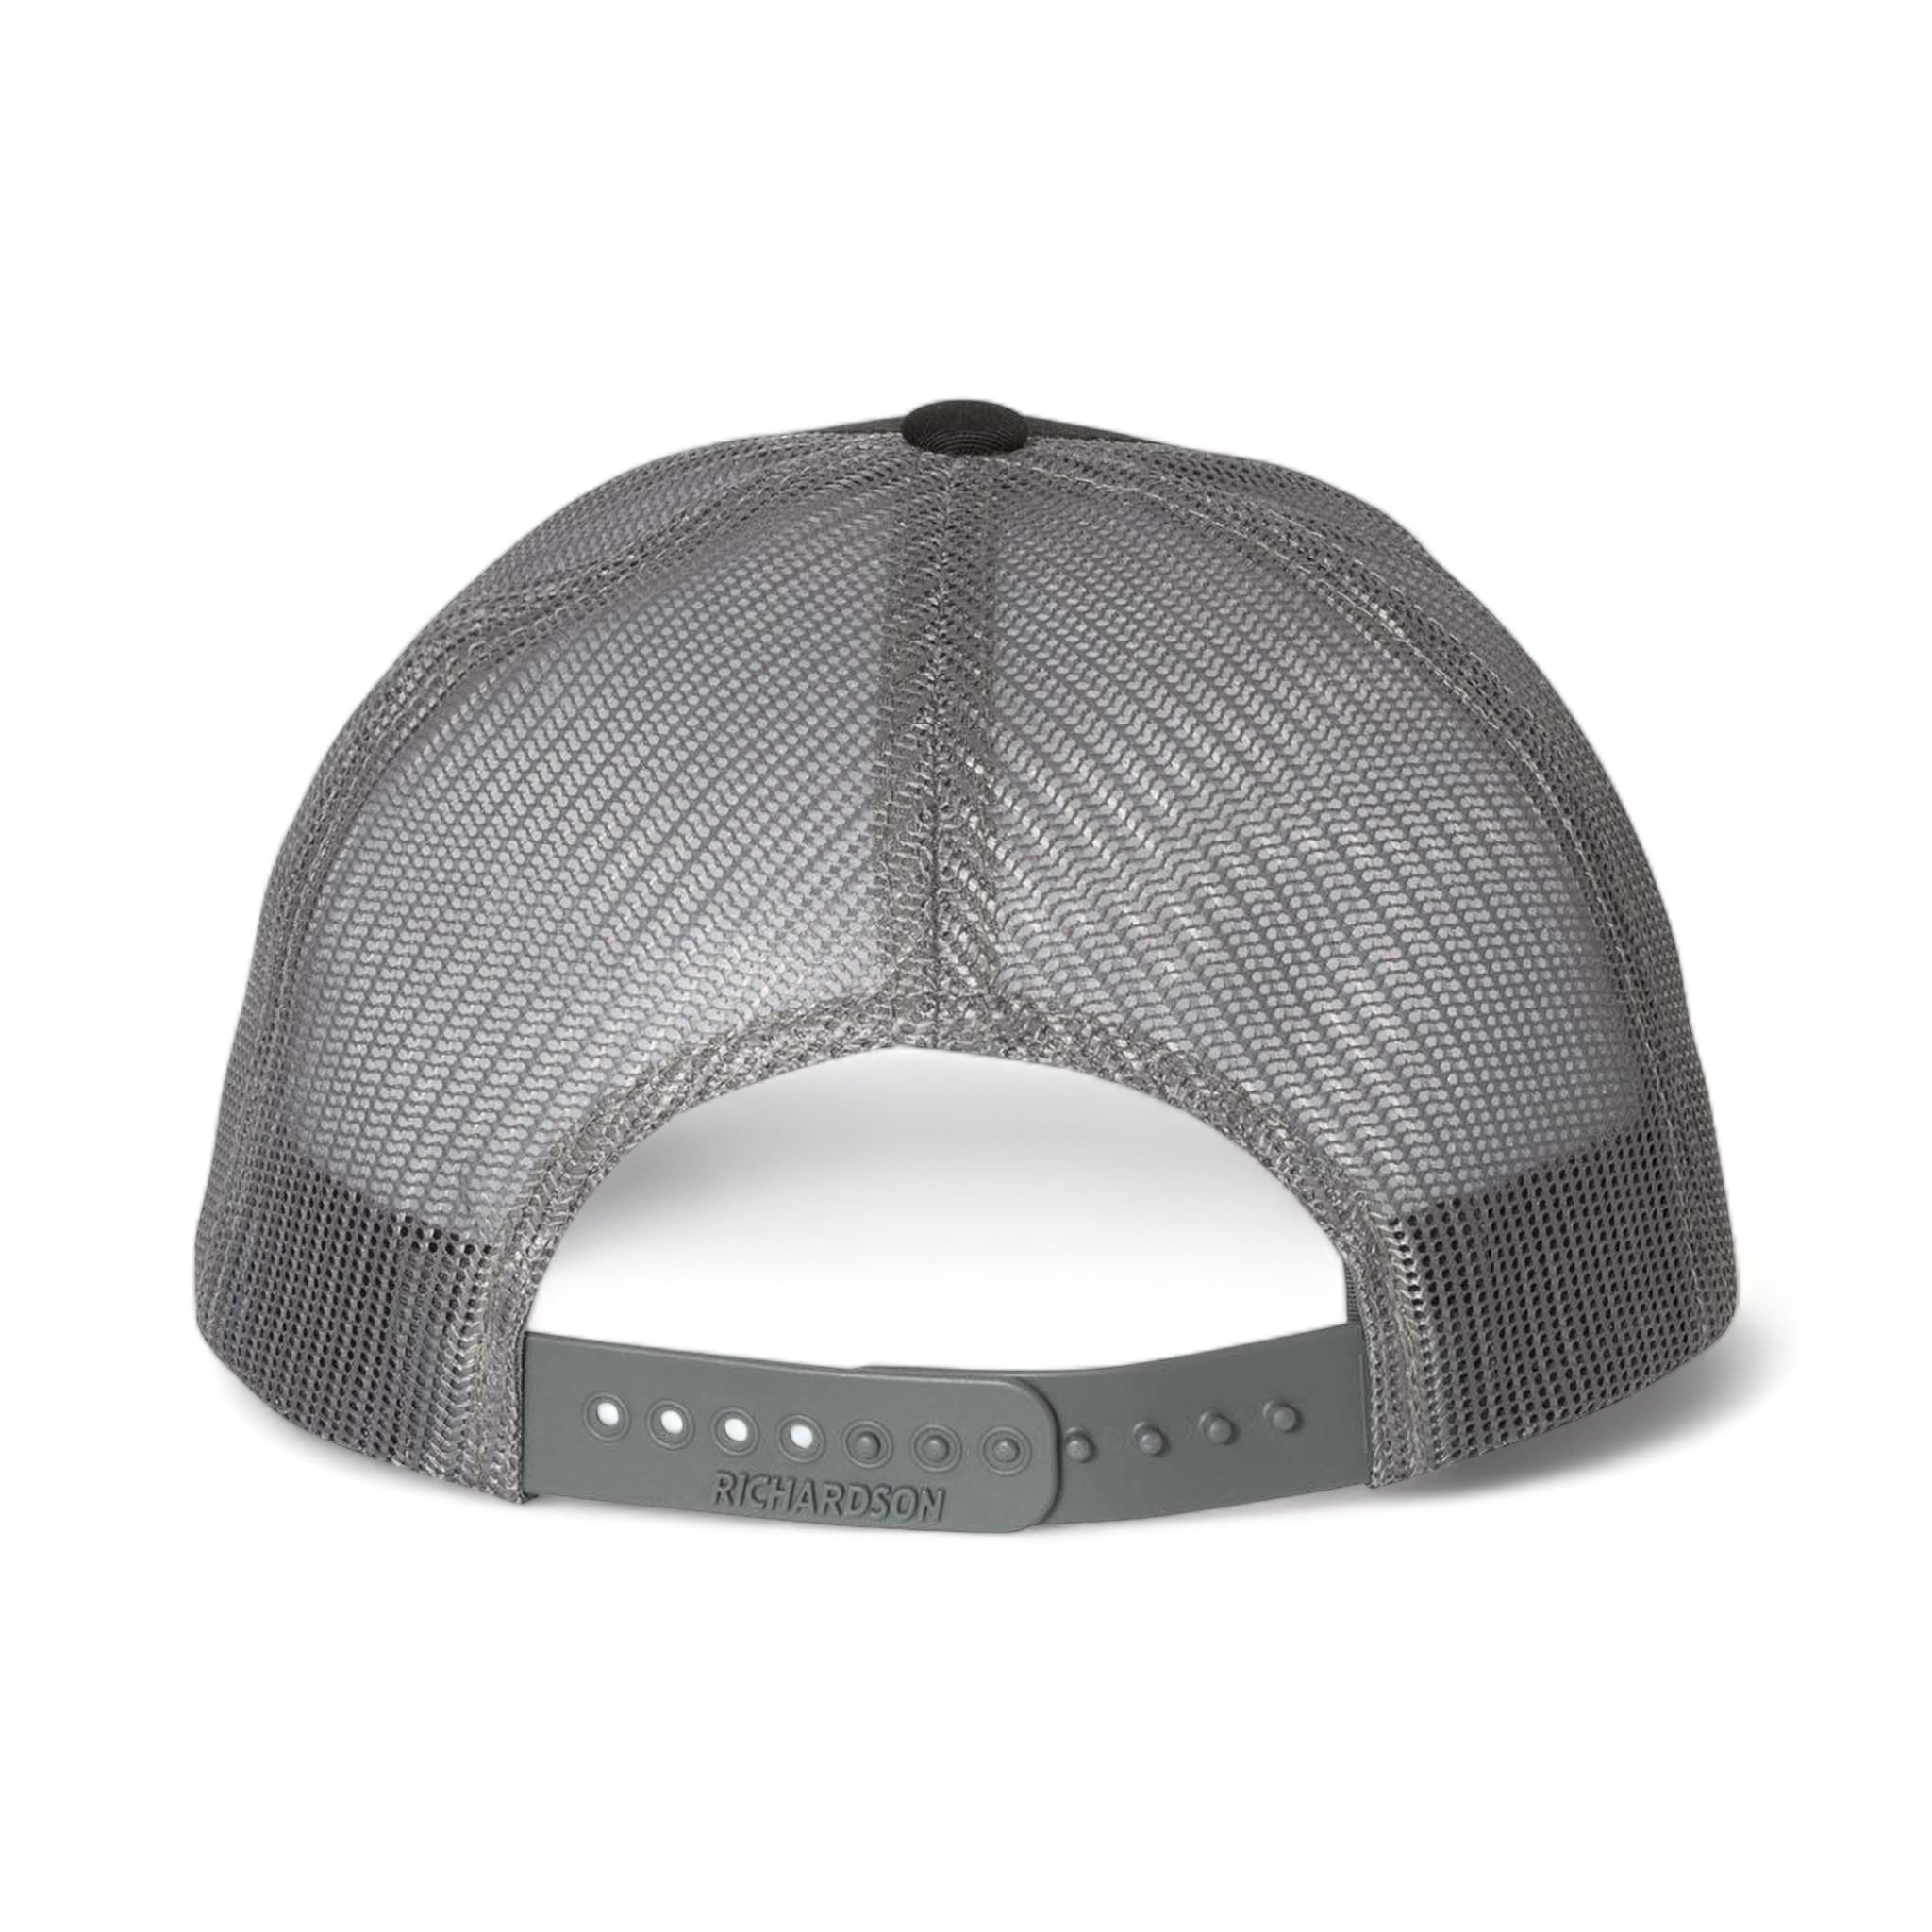 Back view of Richardson 115 custom hat in black and charcoal